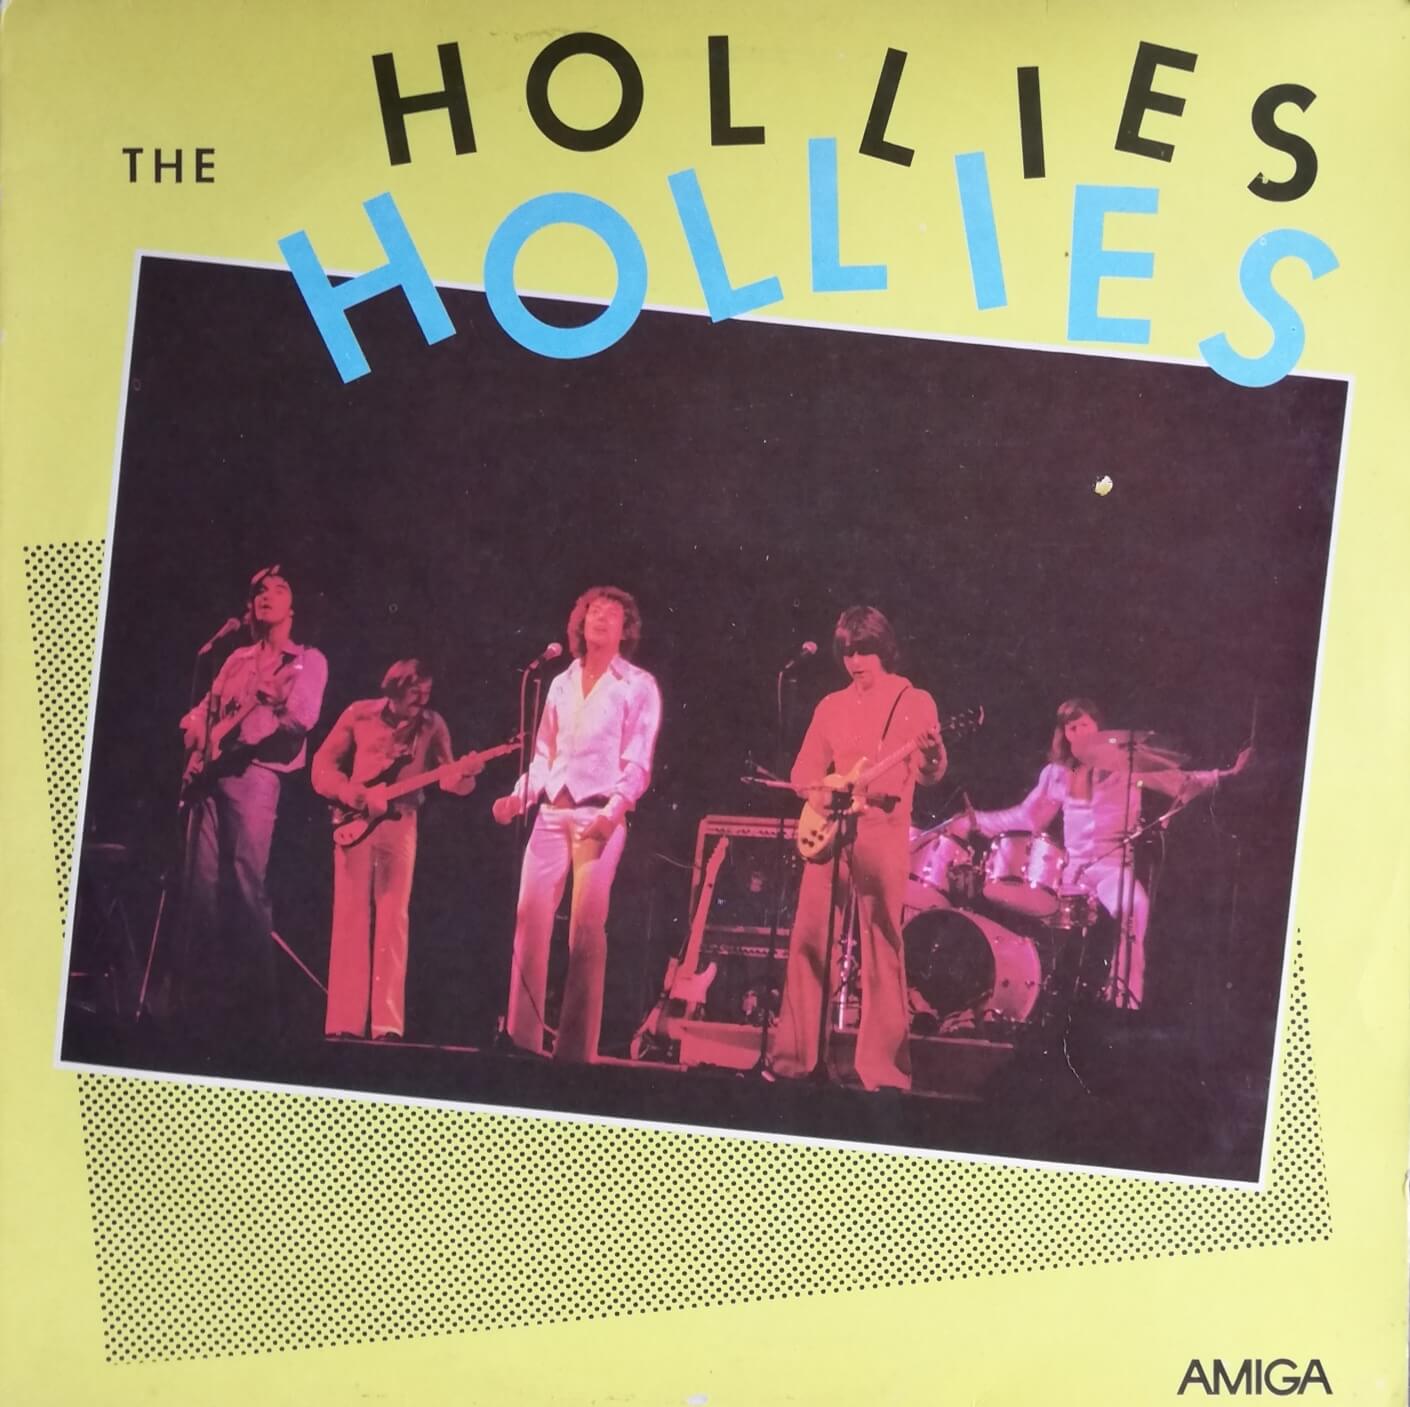 The Hollies – THE HOLLIES LP